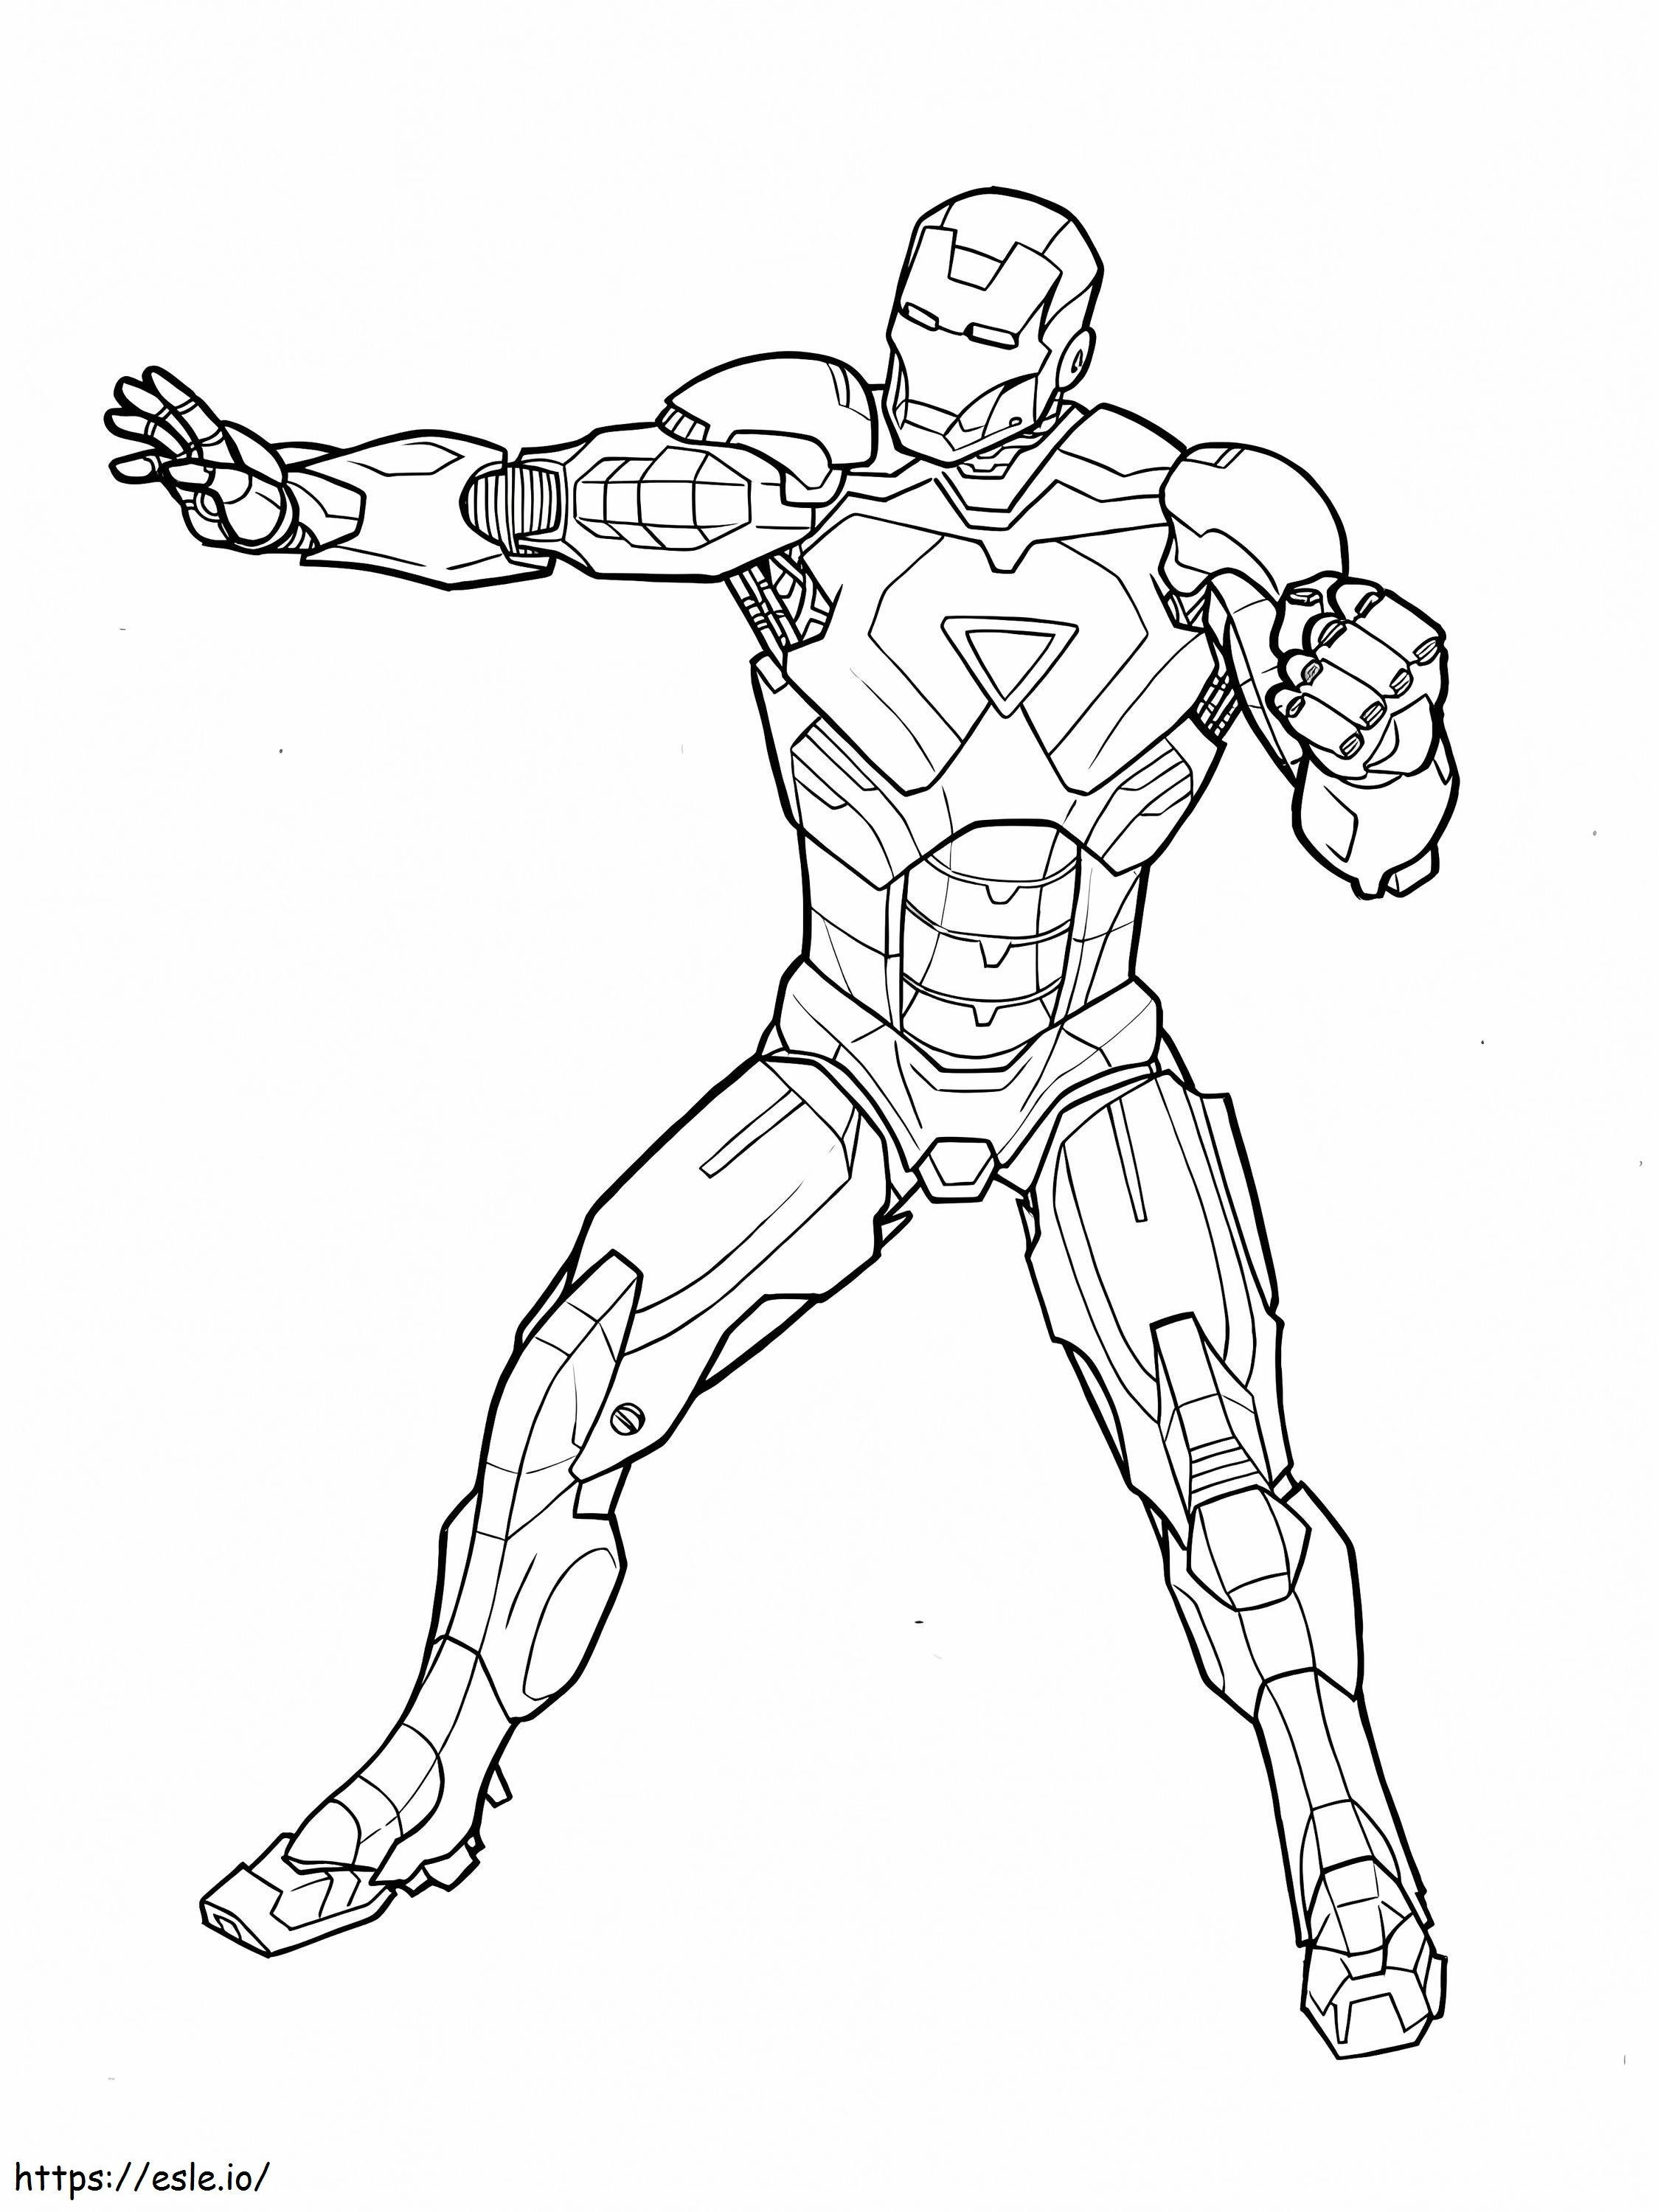 Perfect Ironman coloring page